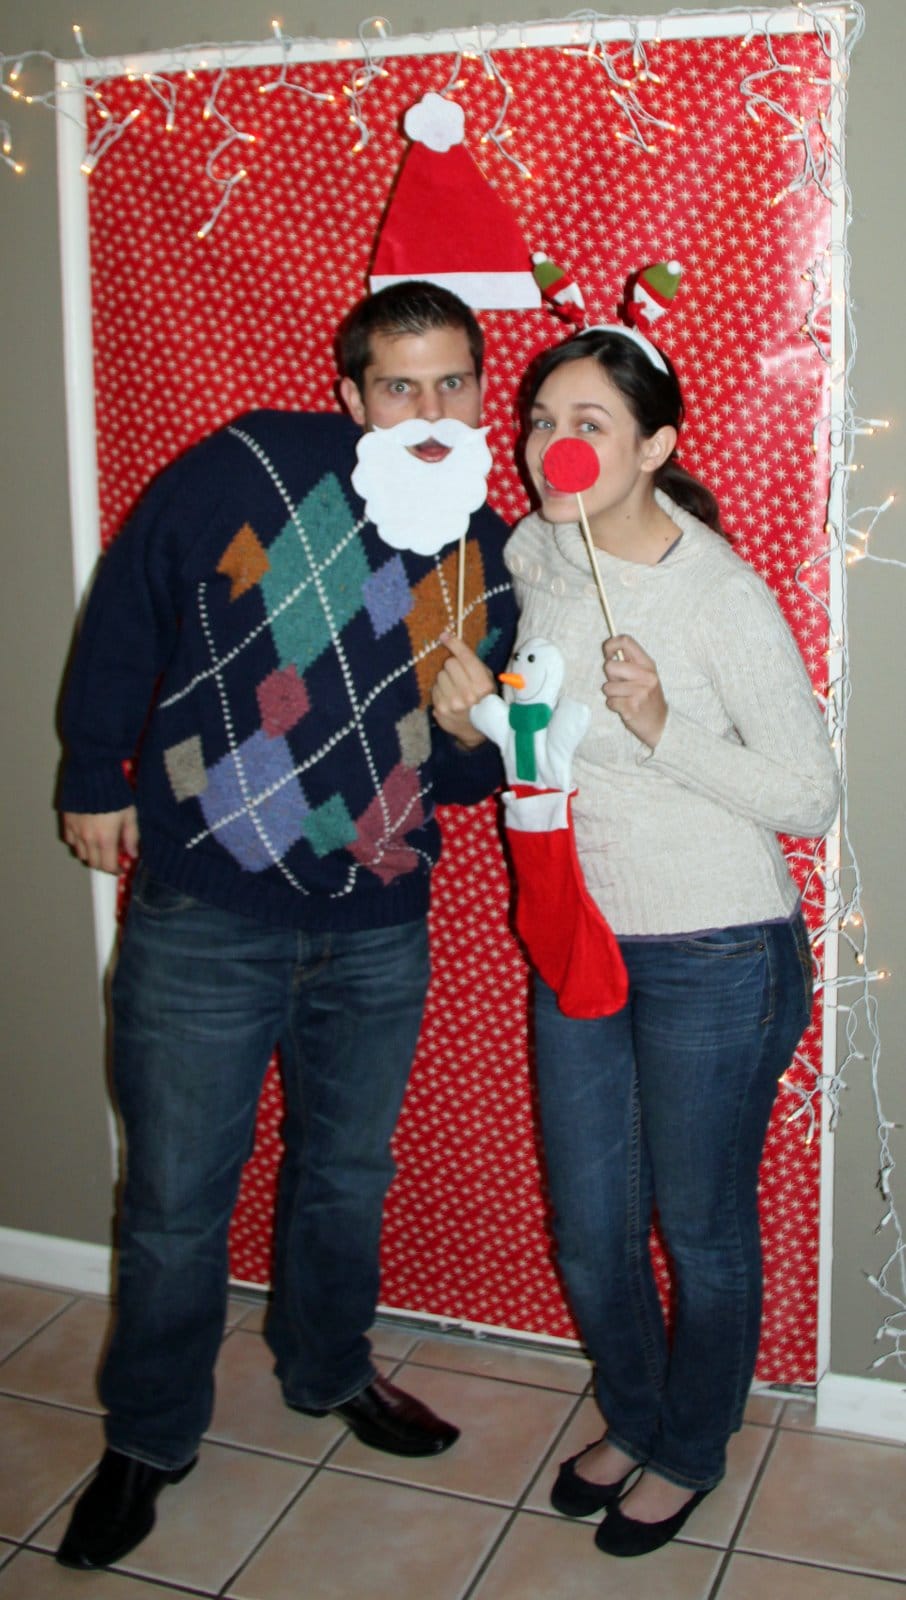 Ugly sweater couples party. 